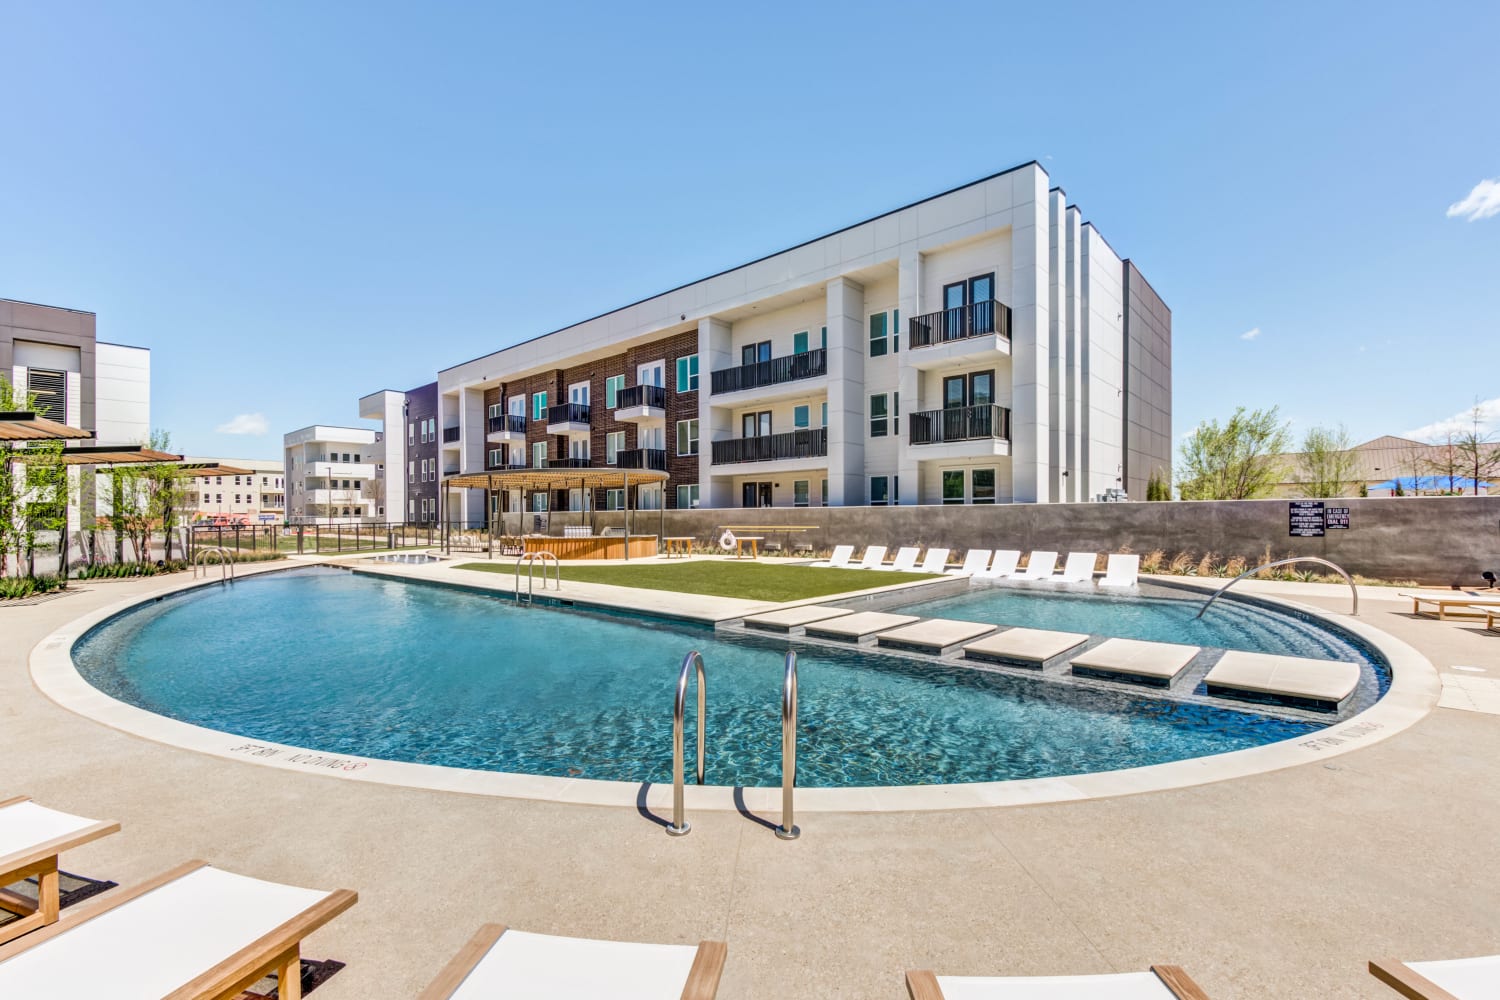 Resort-style pool with poolside seating at Mezzo Apartments in Aubrey, Texas